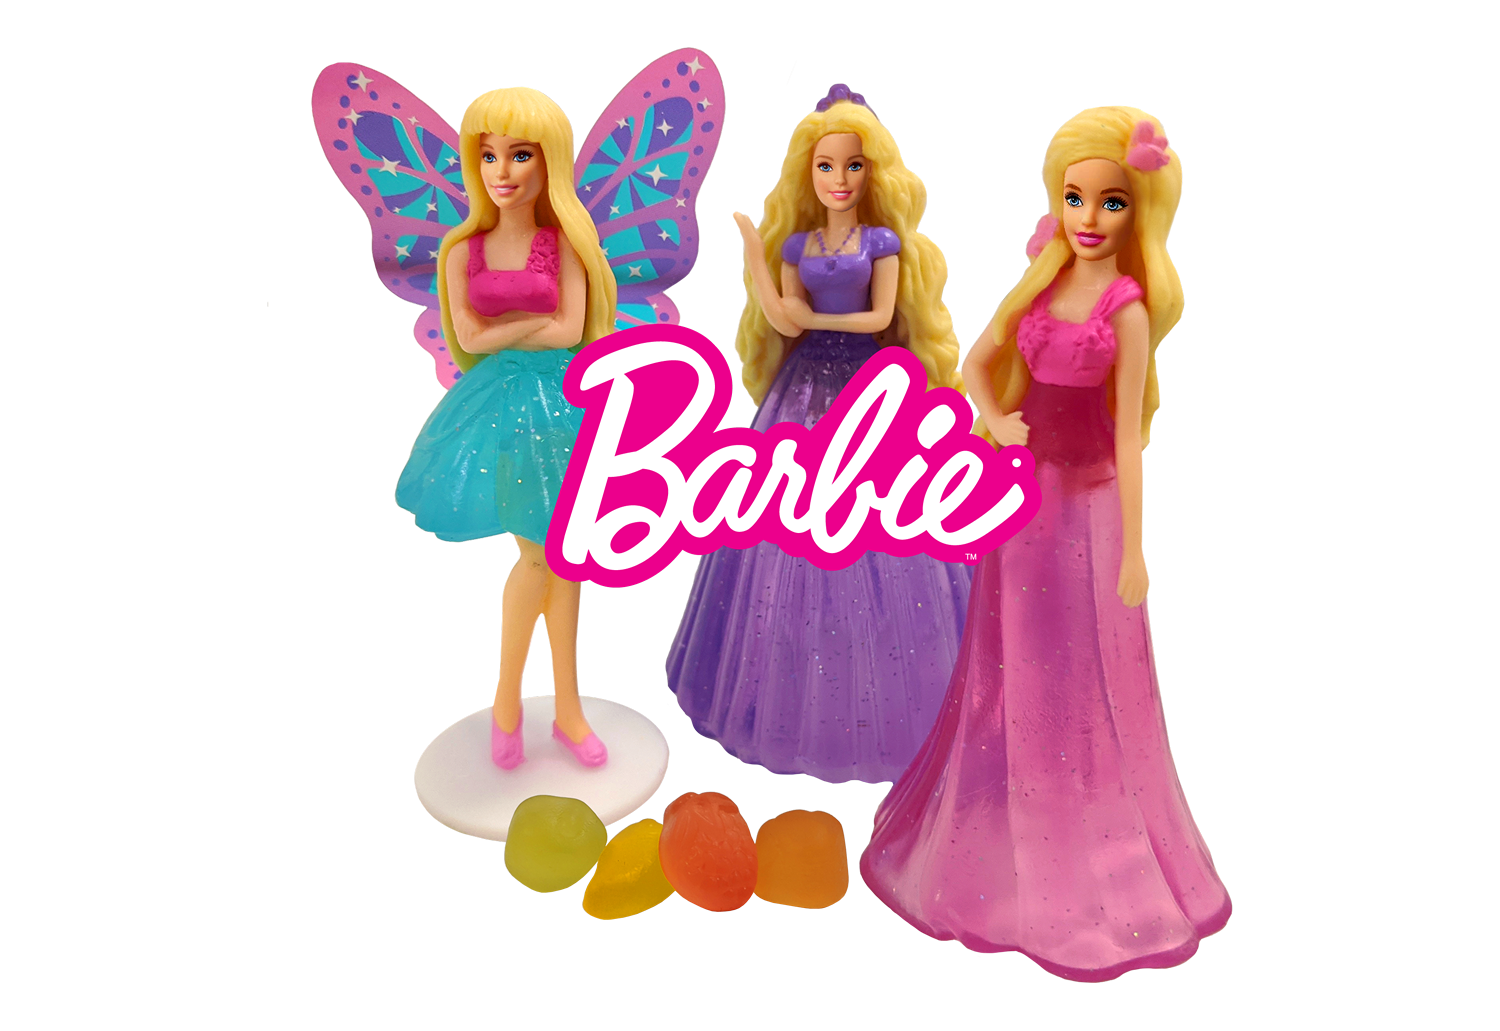 https://exclusivebrands.ca/wp-content/uploads/2021/02/prod-sweetbox-Barbie.png